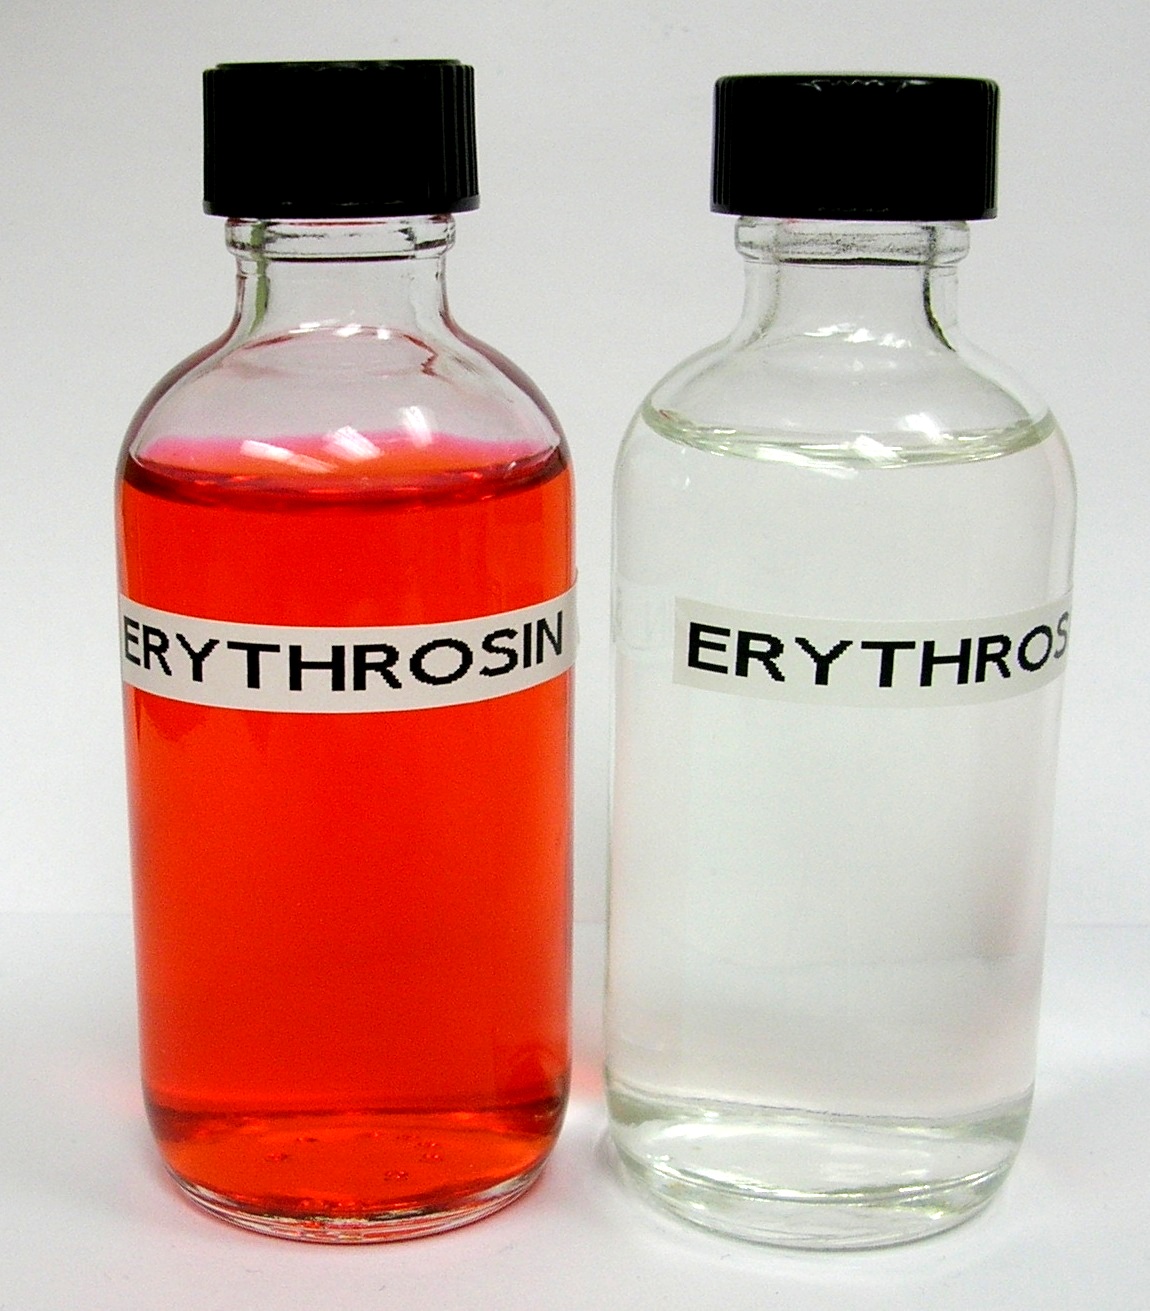 Erythrosin dye wastewater decoloration by Catalytic Advanced Oxidation